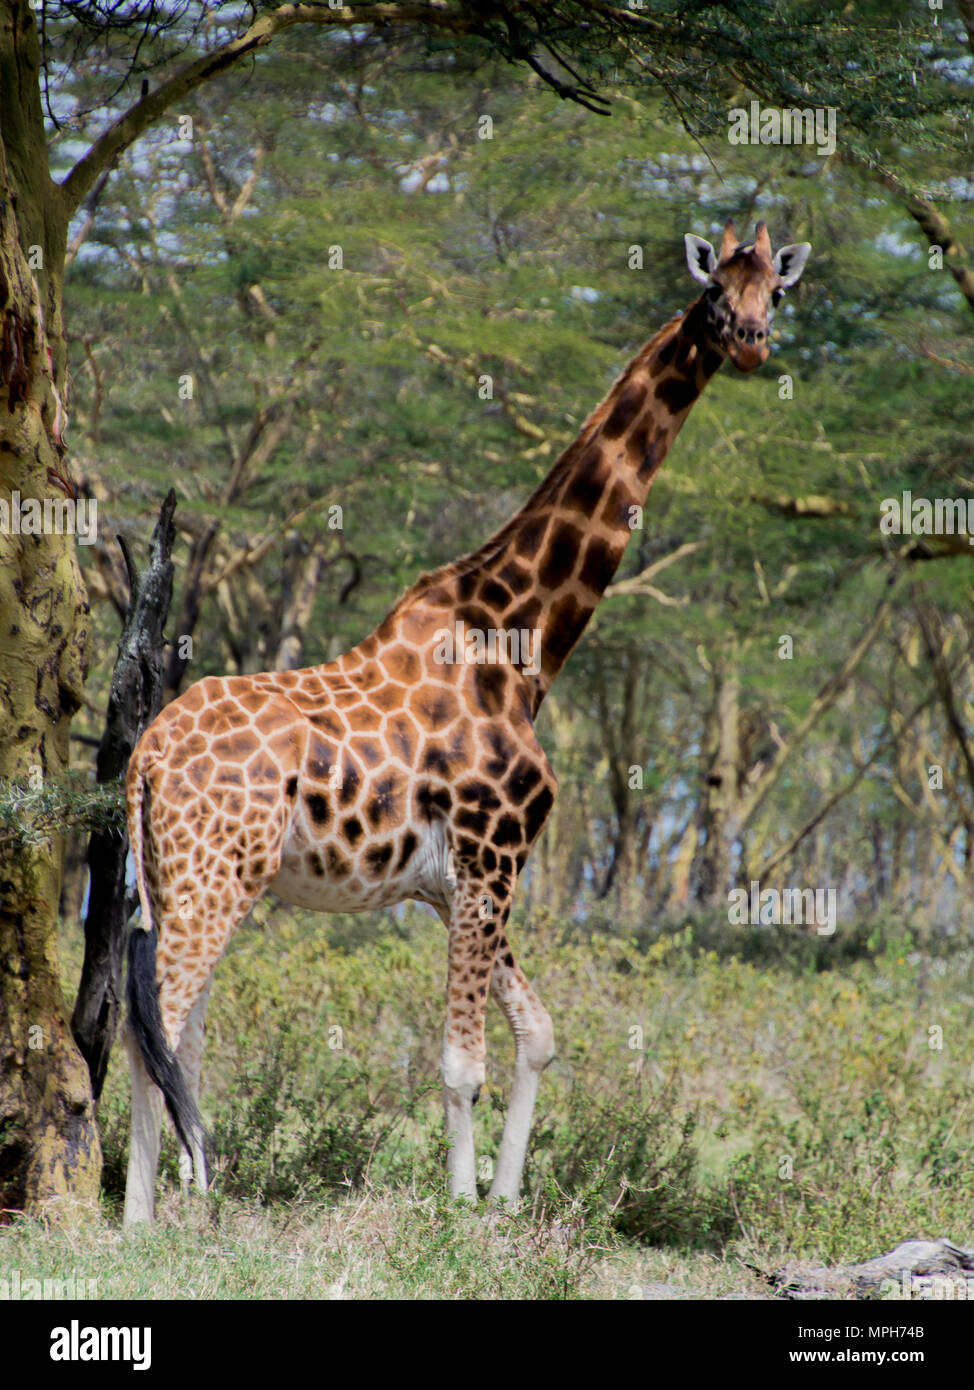 A giraffe standing tall and watching the camera Stock Photo